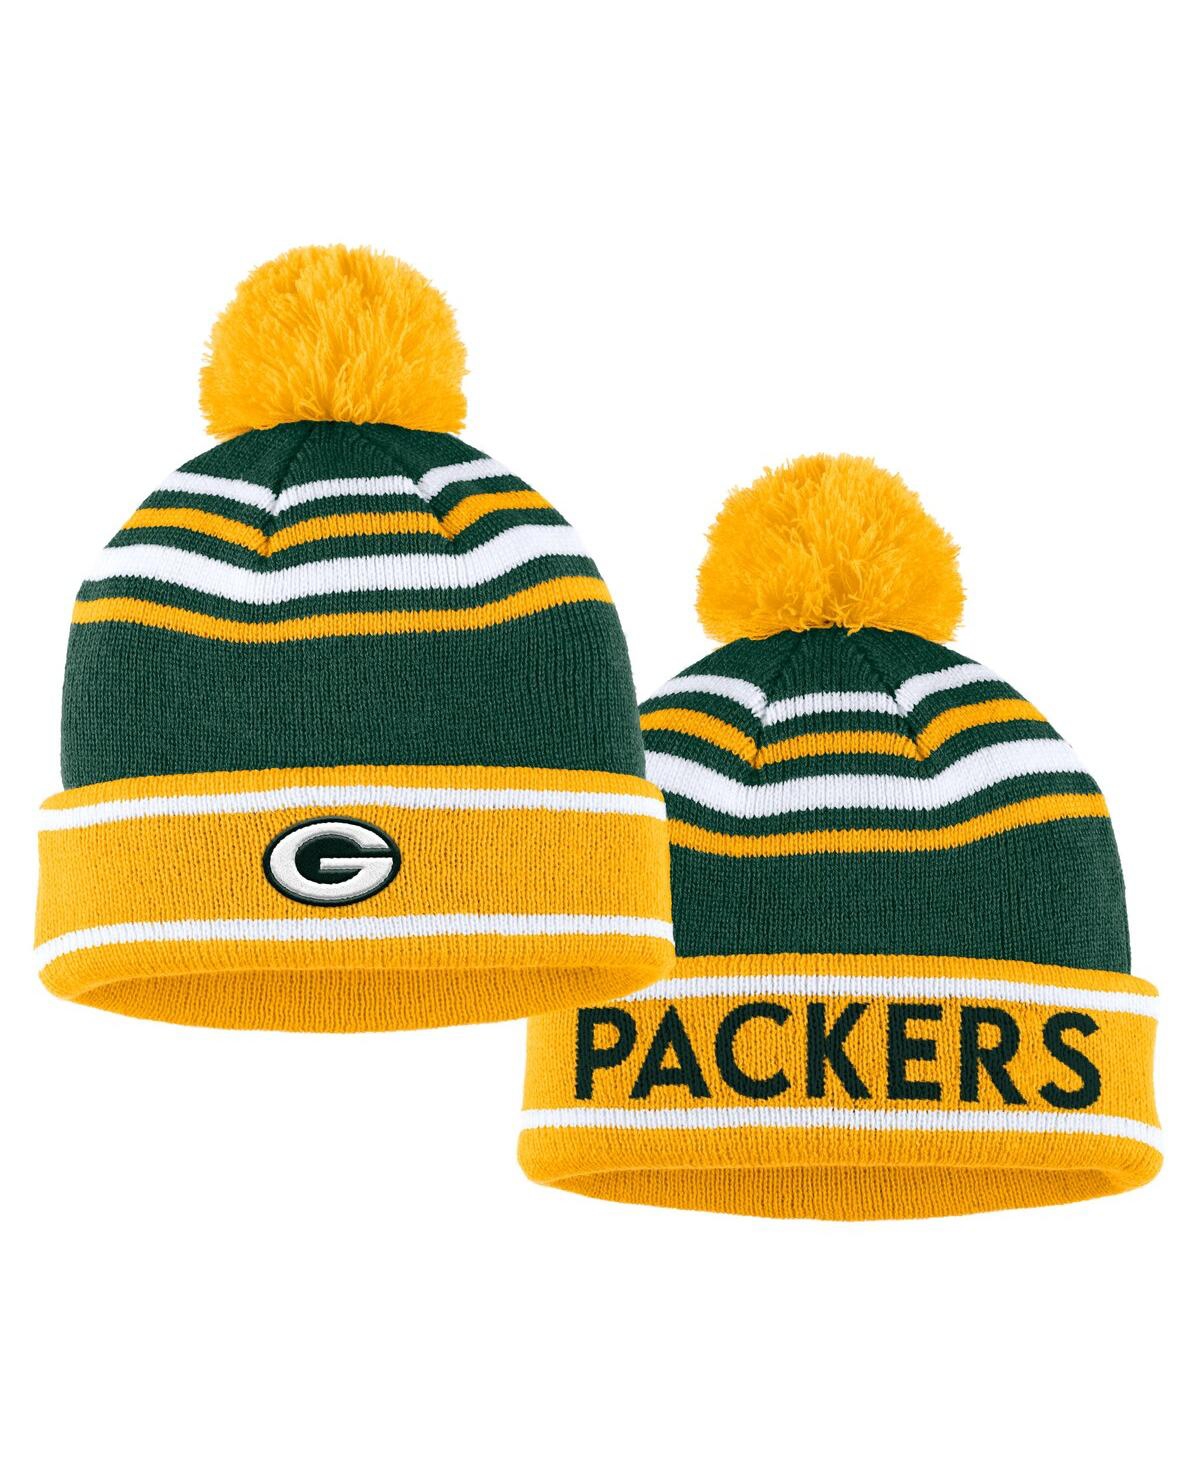 Shop Wear By Erin Andrews Women's  Green Green Bay Packers Colorblock Cuffed Knit Hat With Pom And Scarf S